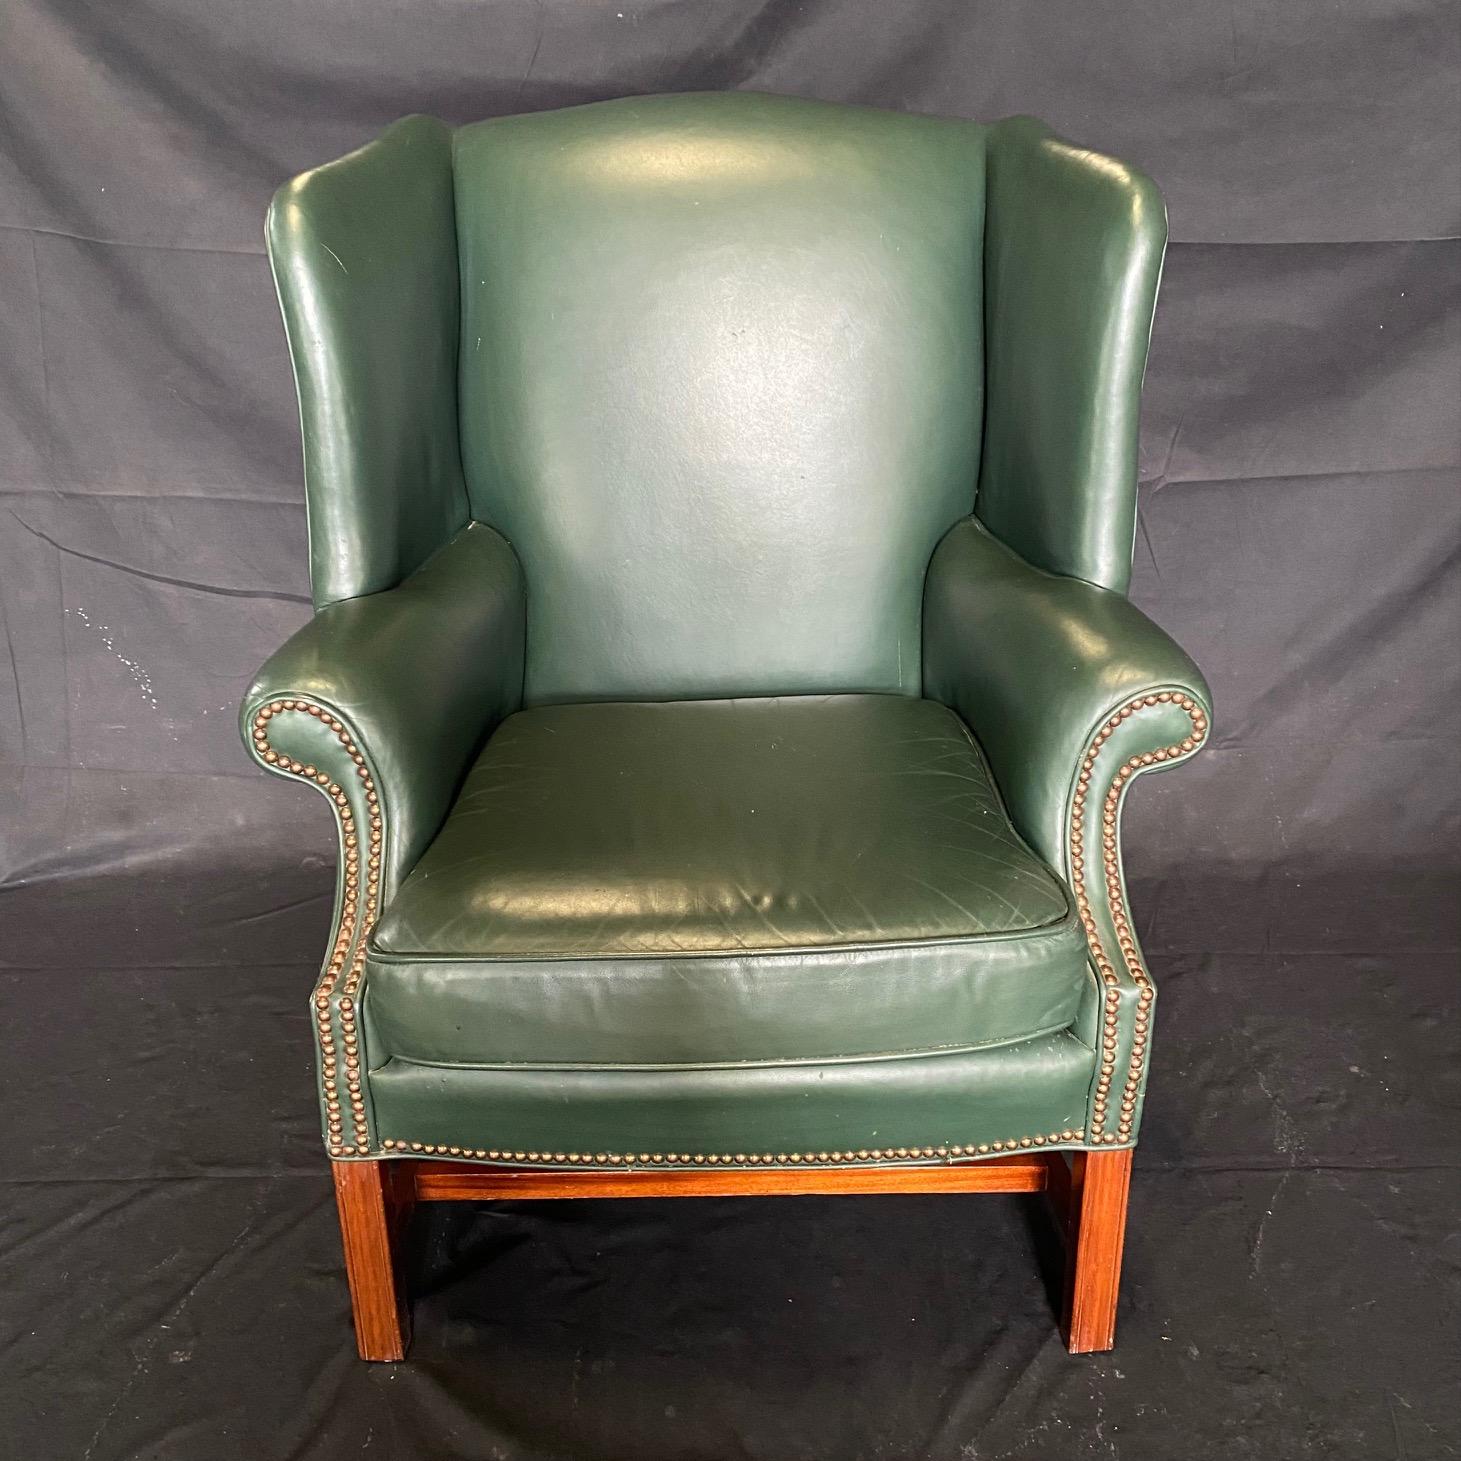 Beautiful and comfortable mid century leather wing chair featuring rich green leather upholstery. Made in the grand English Georgian style with a mahogany hardwood frame. The chairs have large wings conjoined to rolled arms with decorative brass